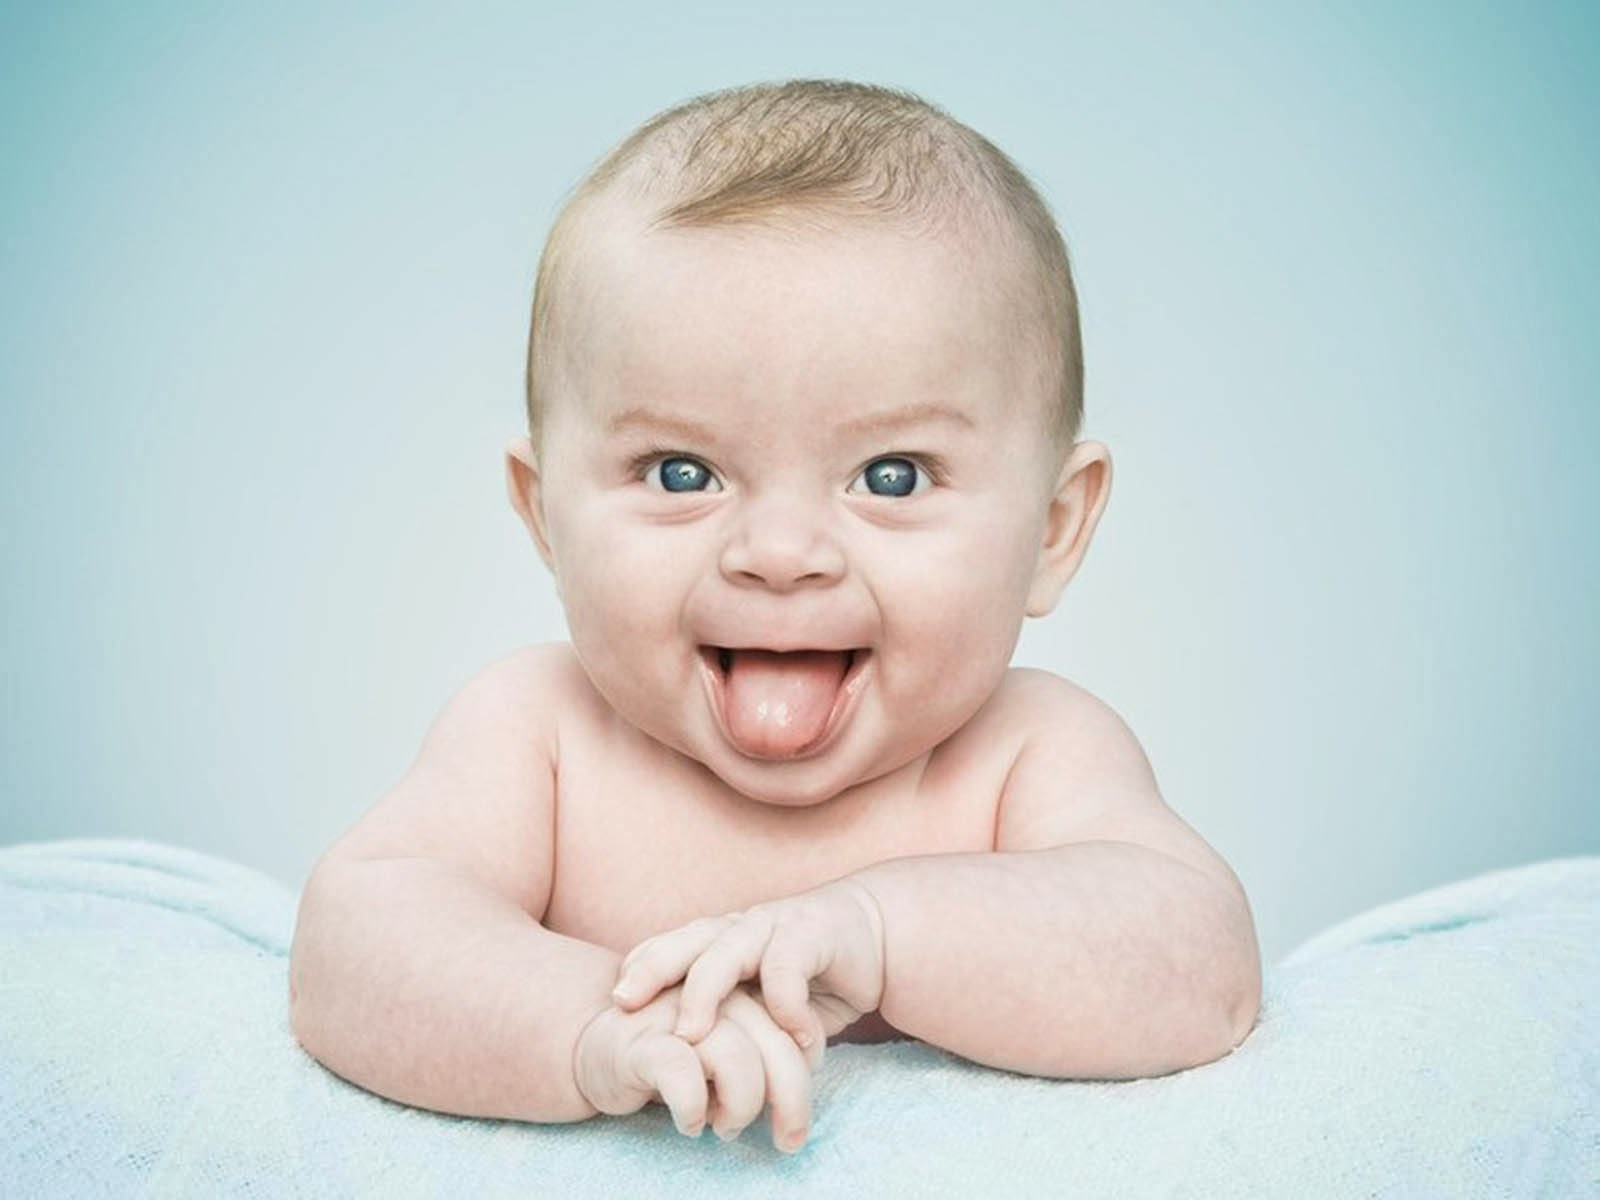 Baby Wallpaper In Hd - Smiling Baby Images Hd - HD Wallpaper 